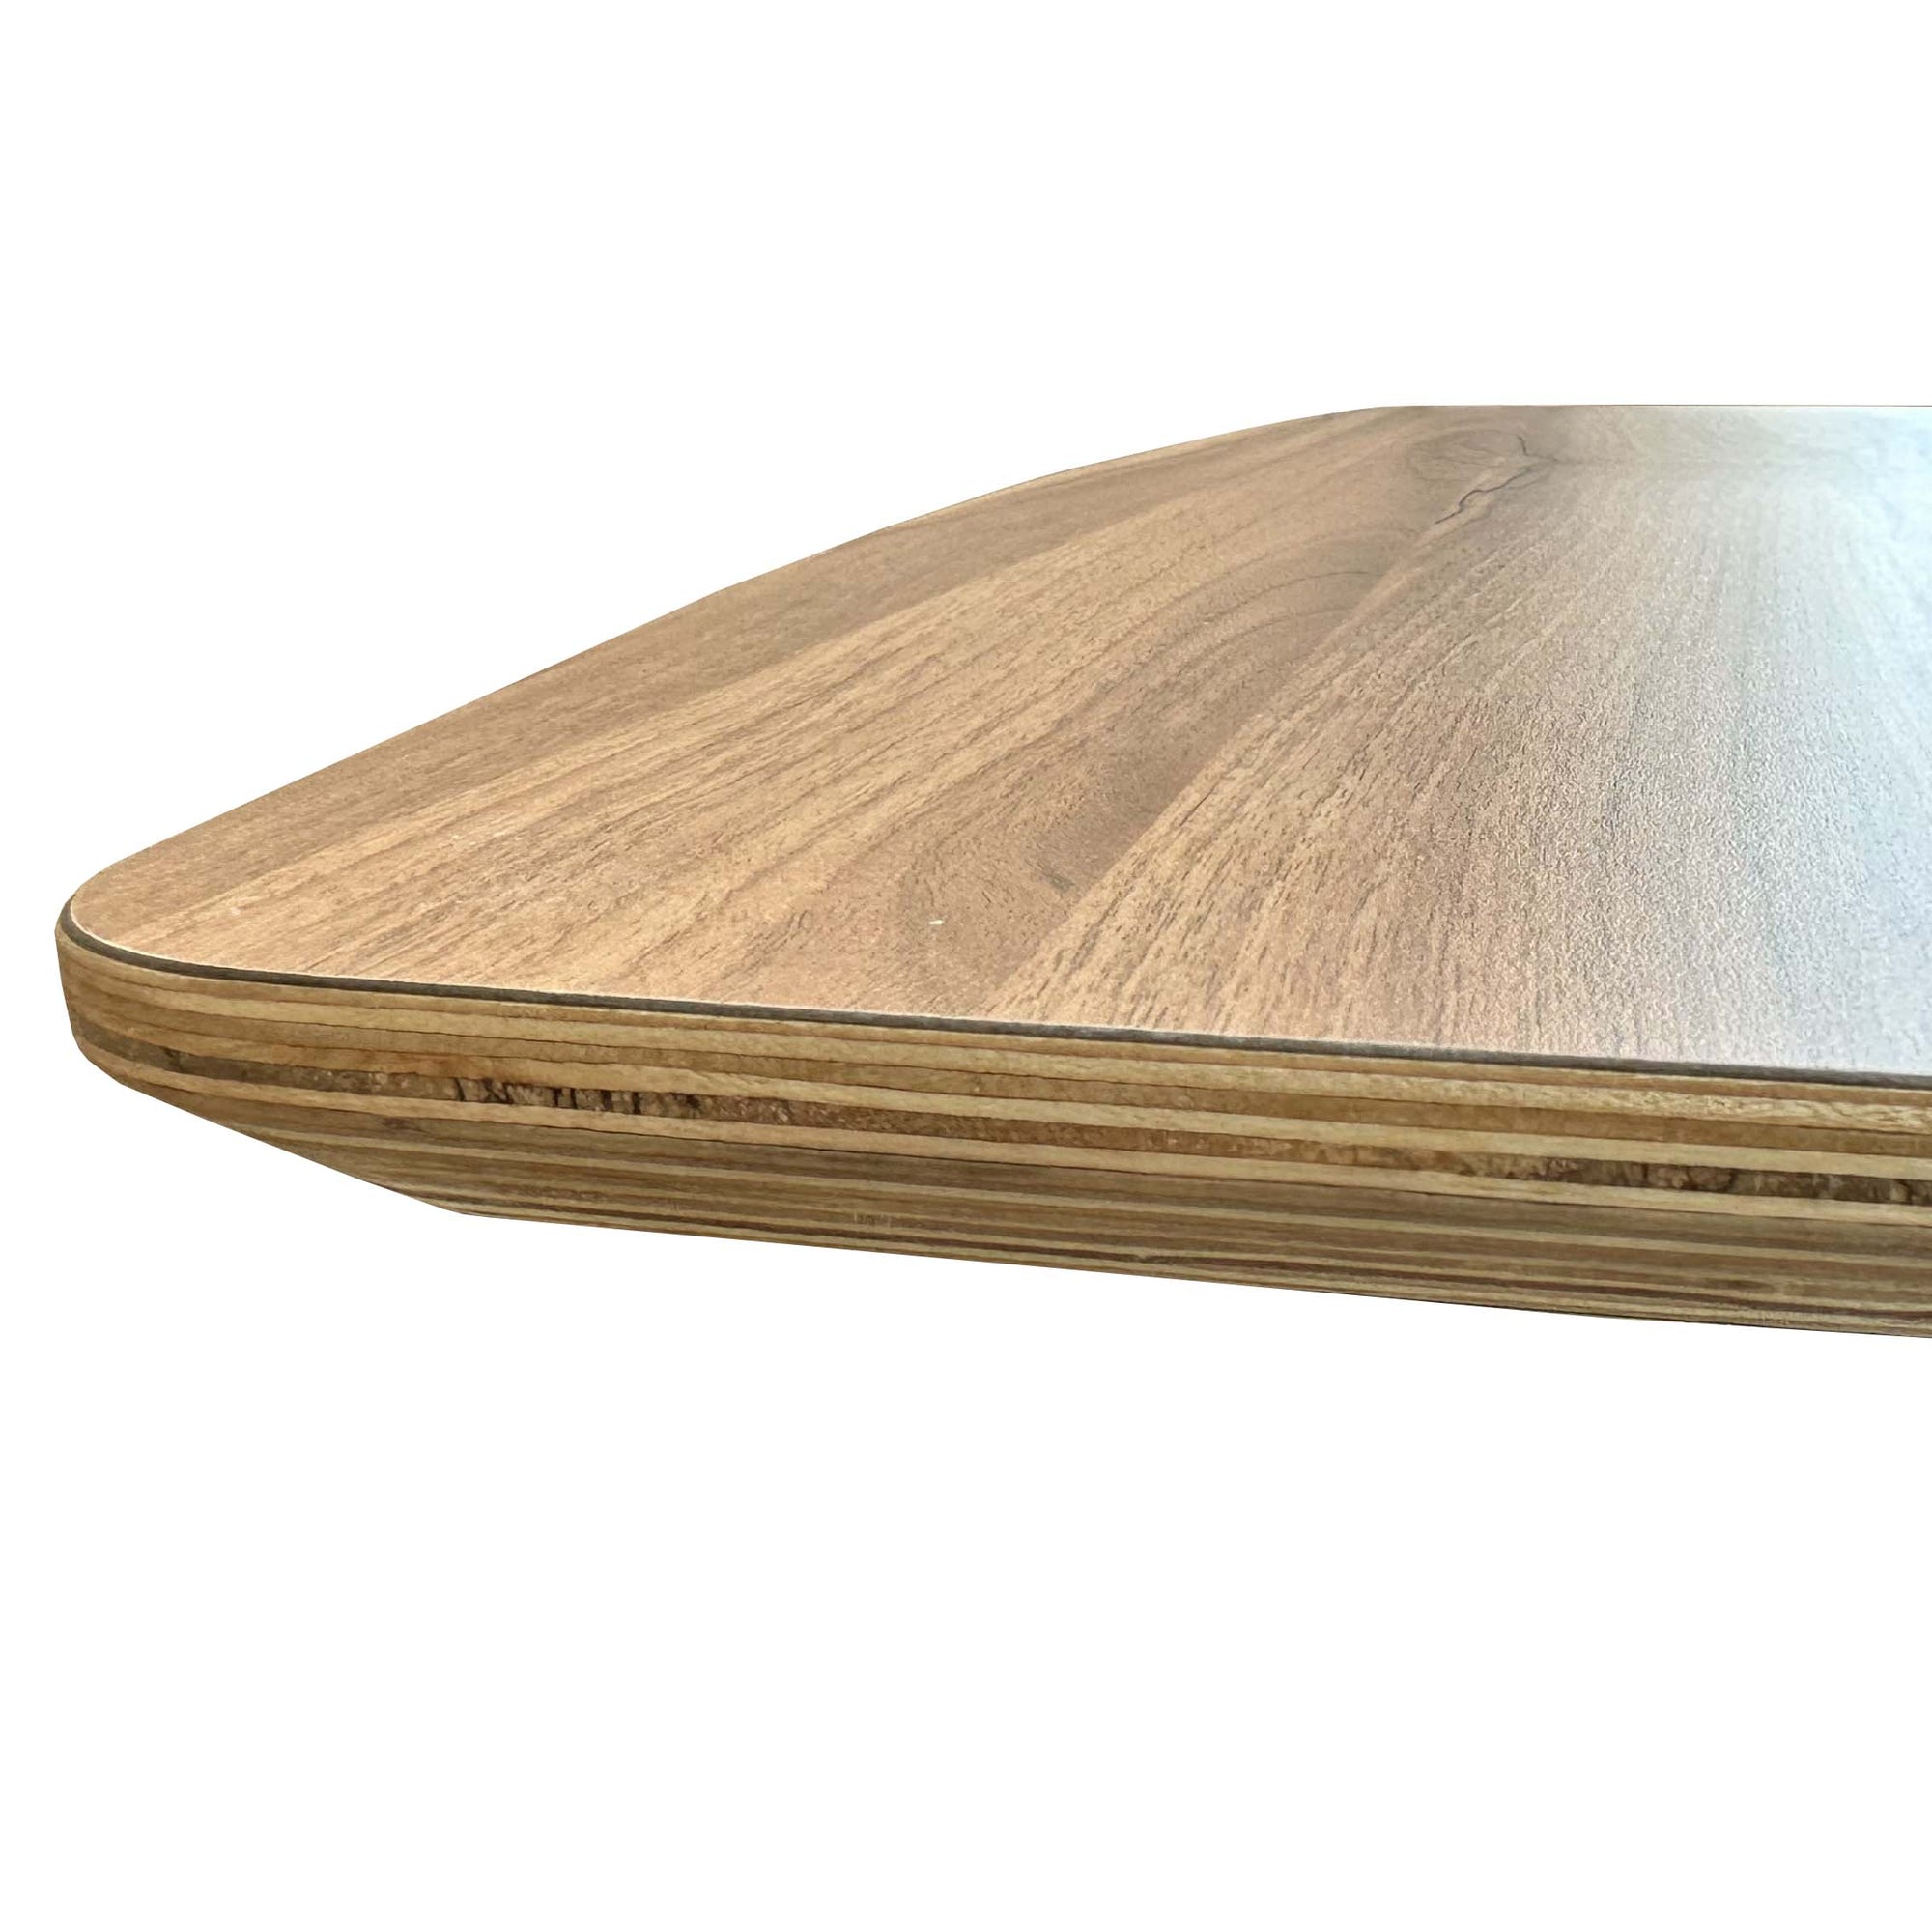 HPL-7 Rectangle Table tops| Wood table tops| Dining table tops| 120cm*80cm/ 160cm*80cm